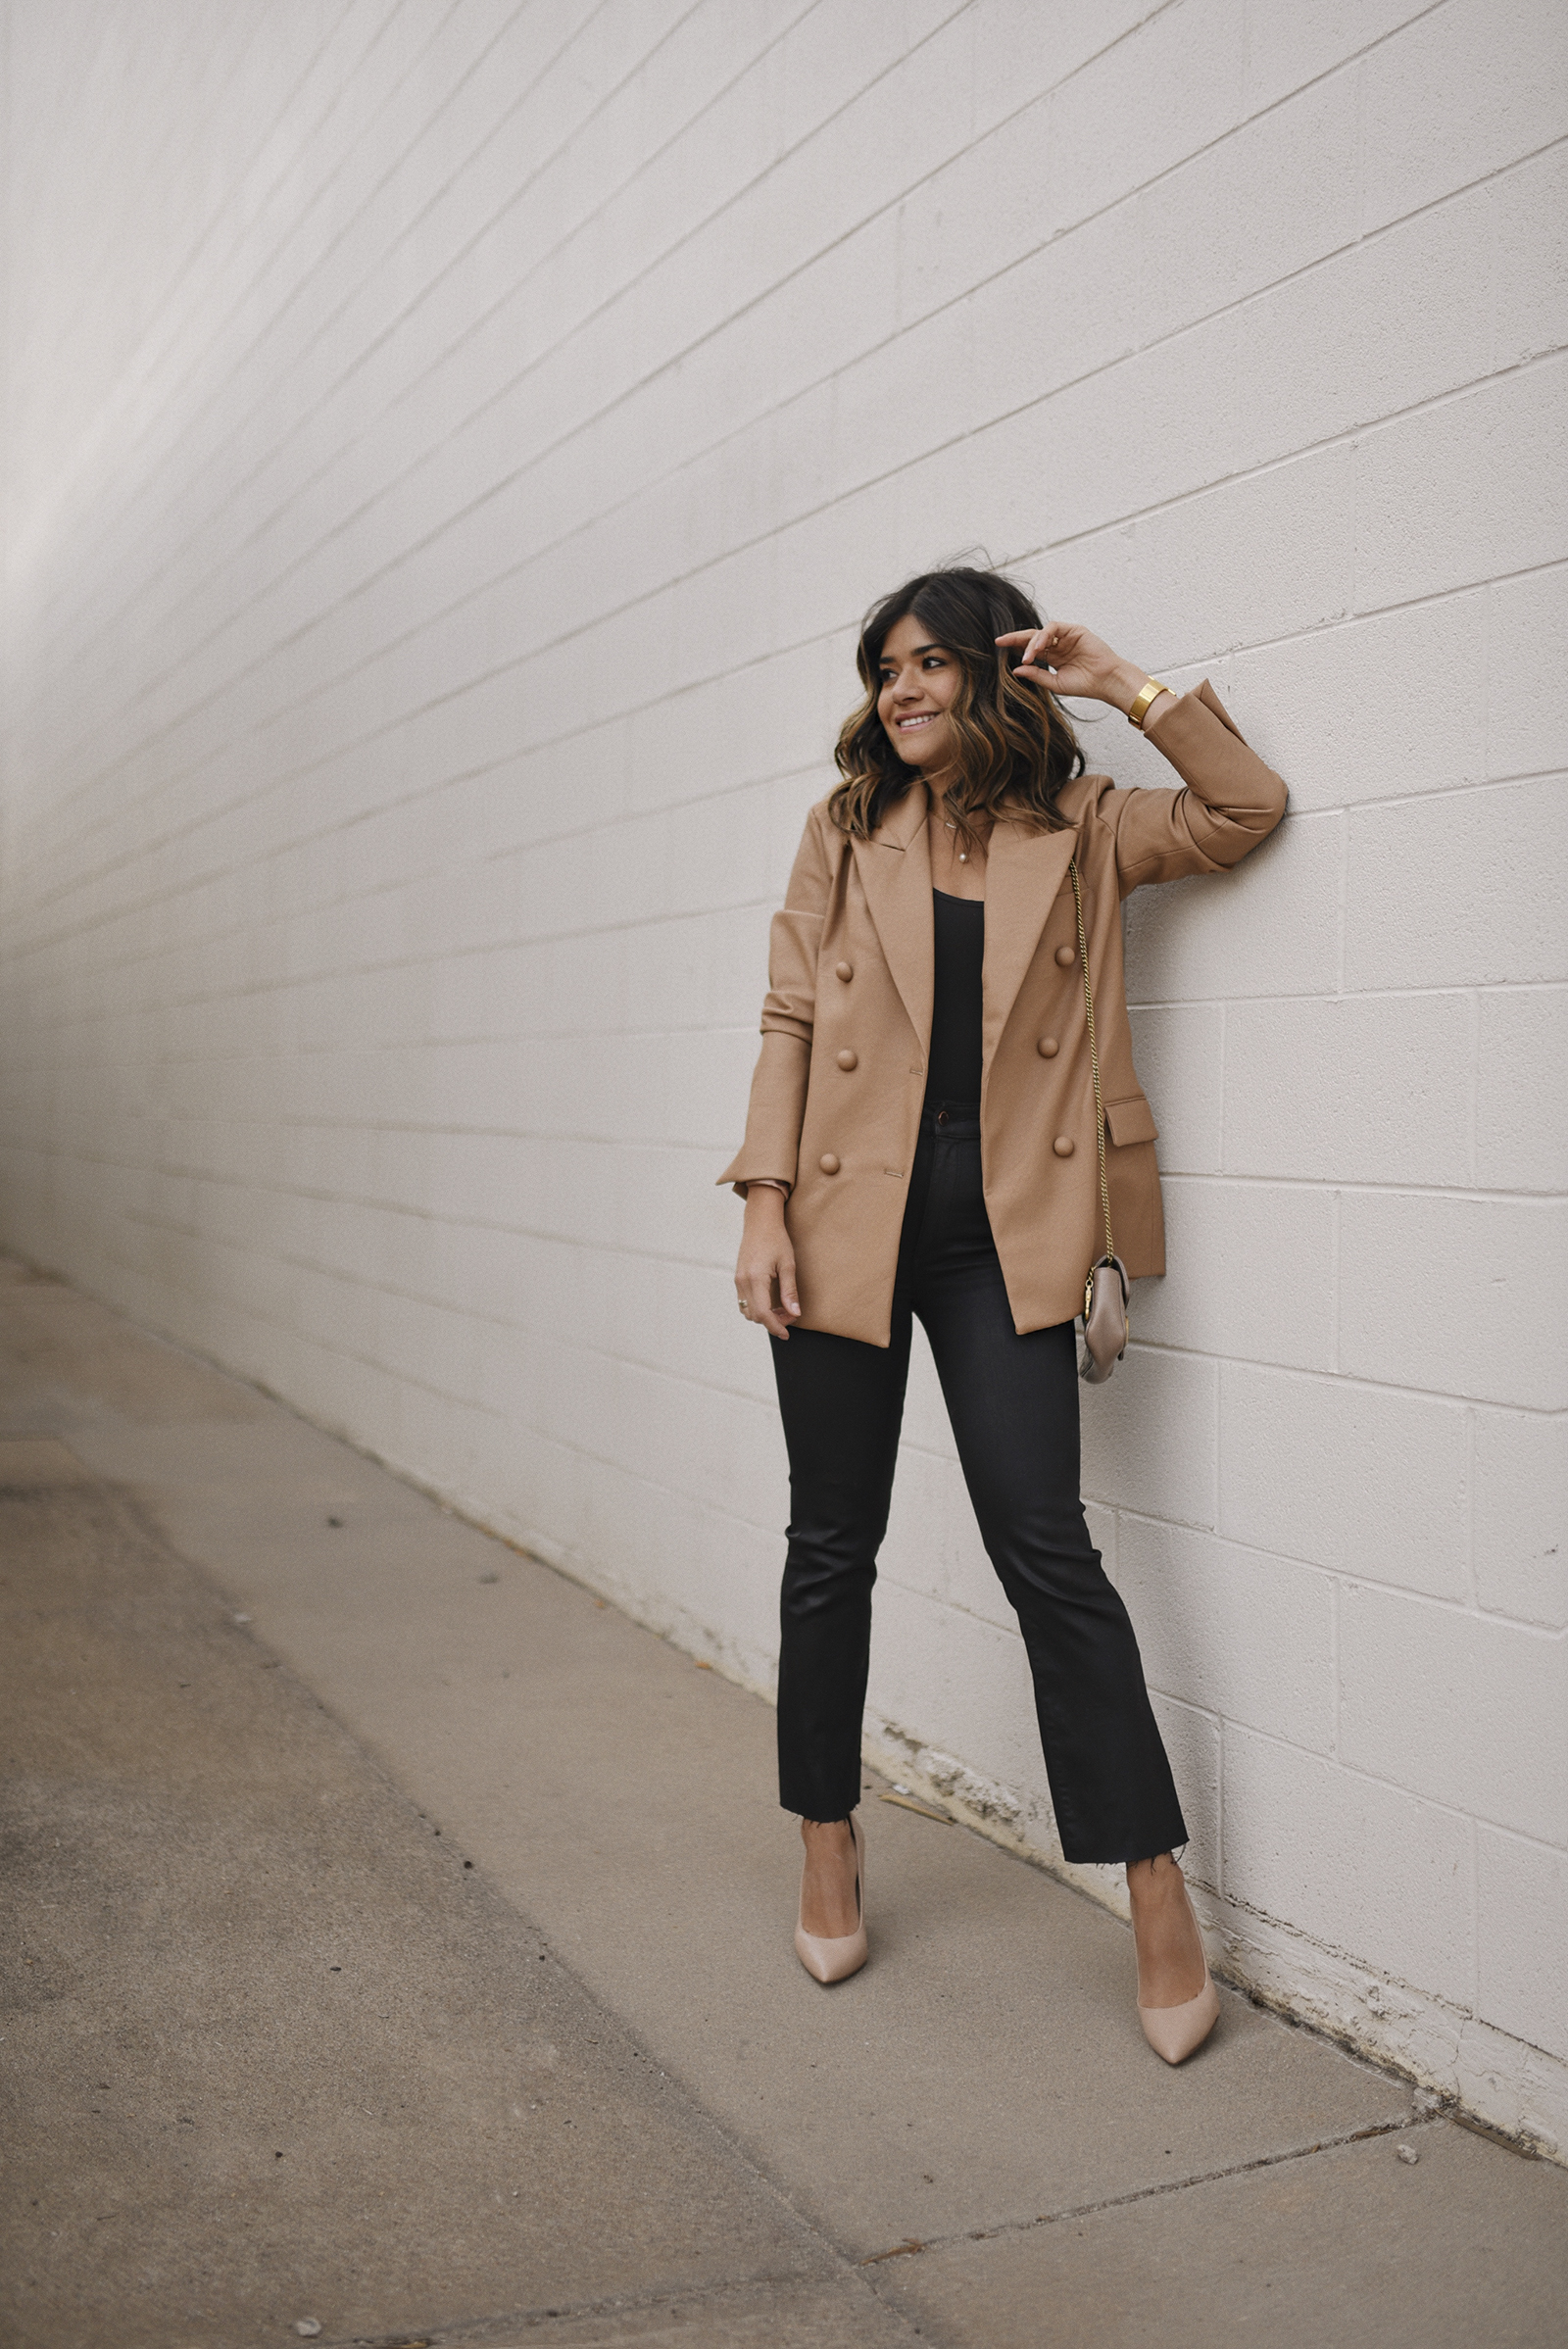 Carolina Hellal of Chic Talk wearinga BLANKNYC faux leather blazer, DL1960 black coated jeans, Nine West nude pumps and Gucci mini marmont bag